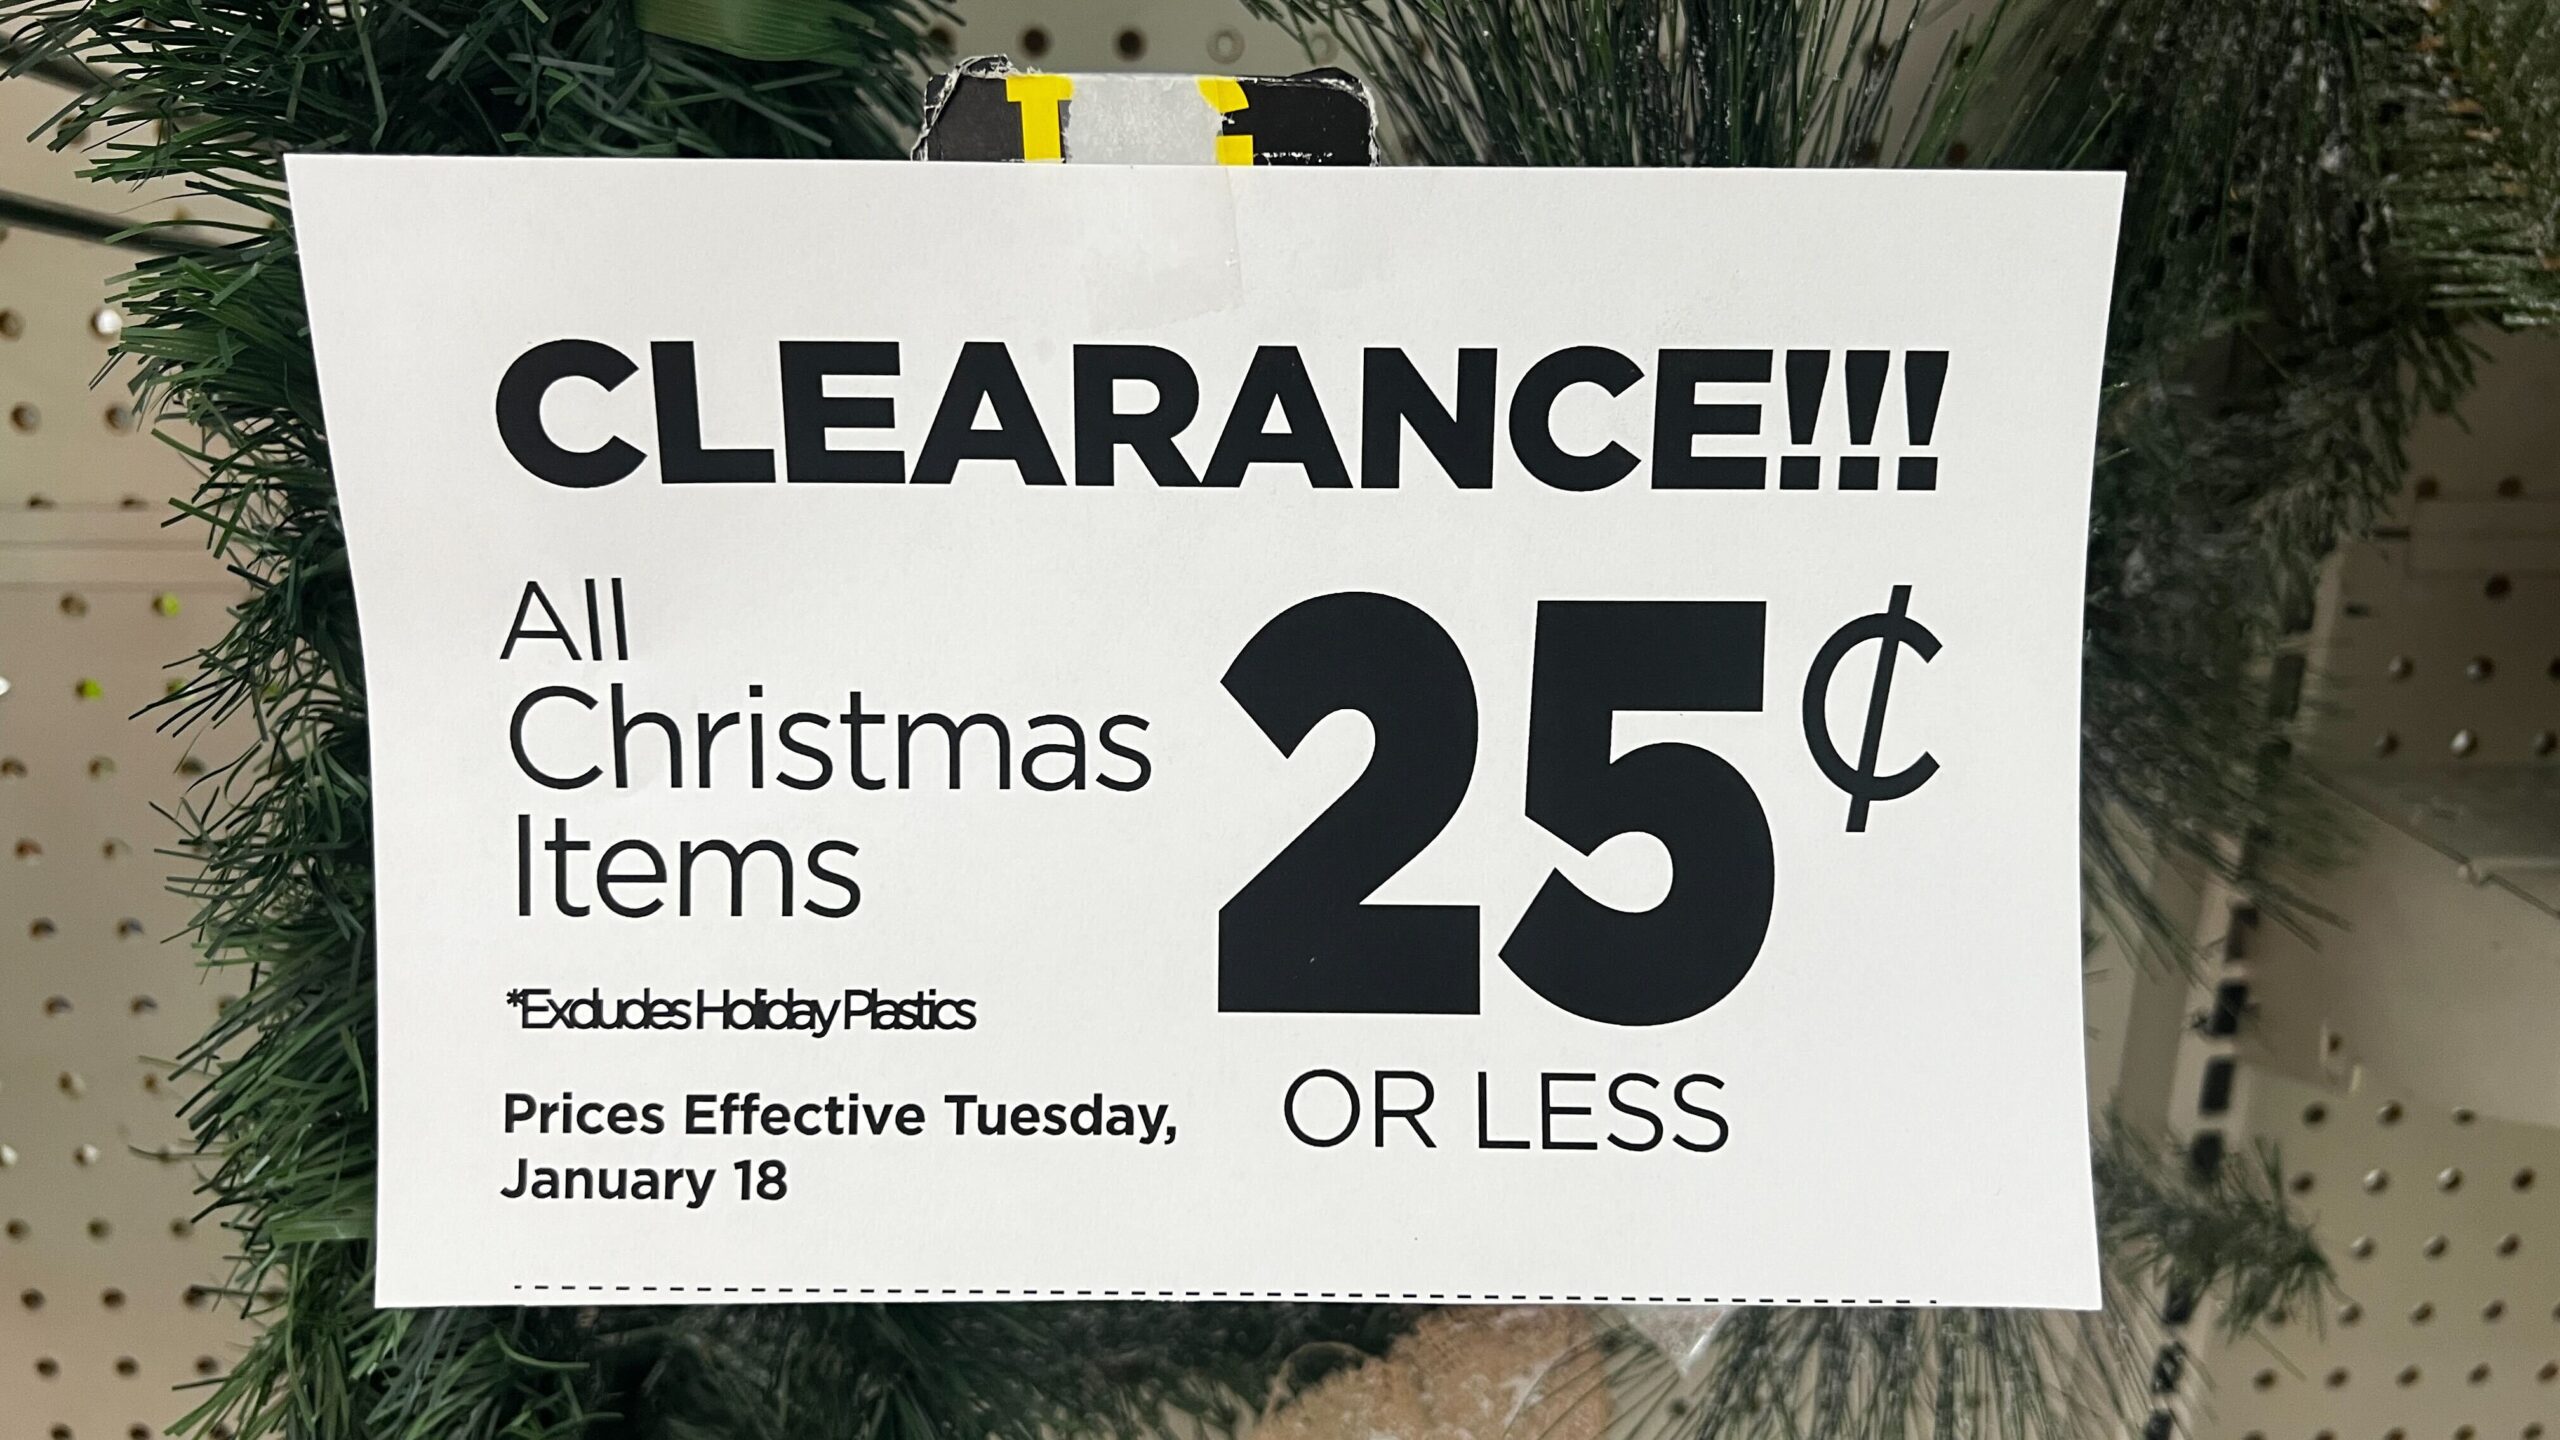 Dollar General 25¢ Christmas Clearance The Freebie Guy® ️️️